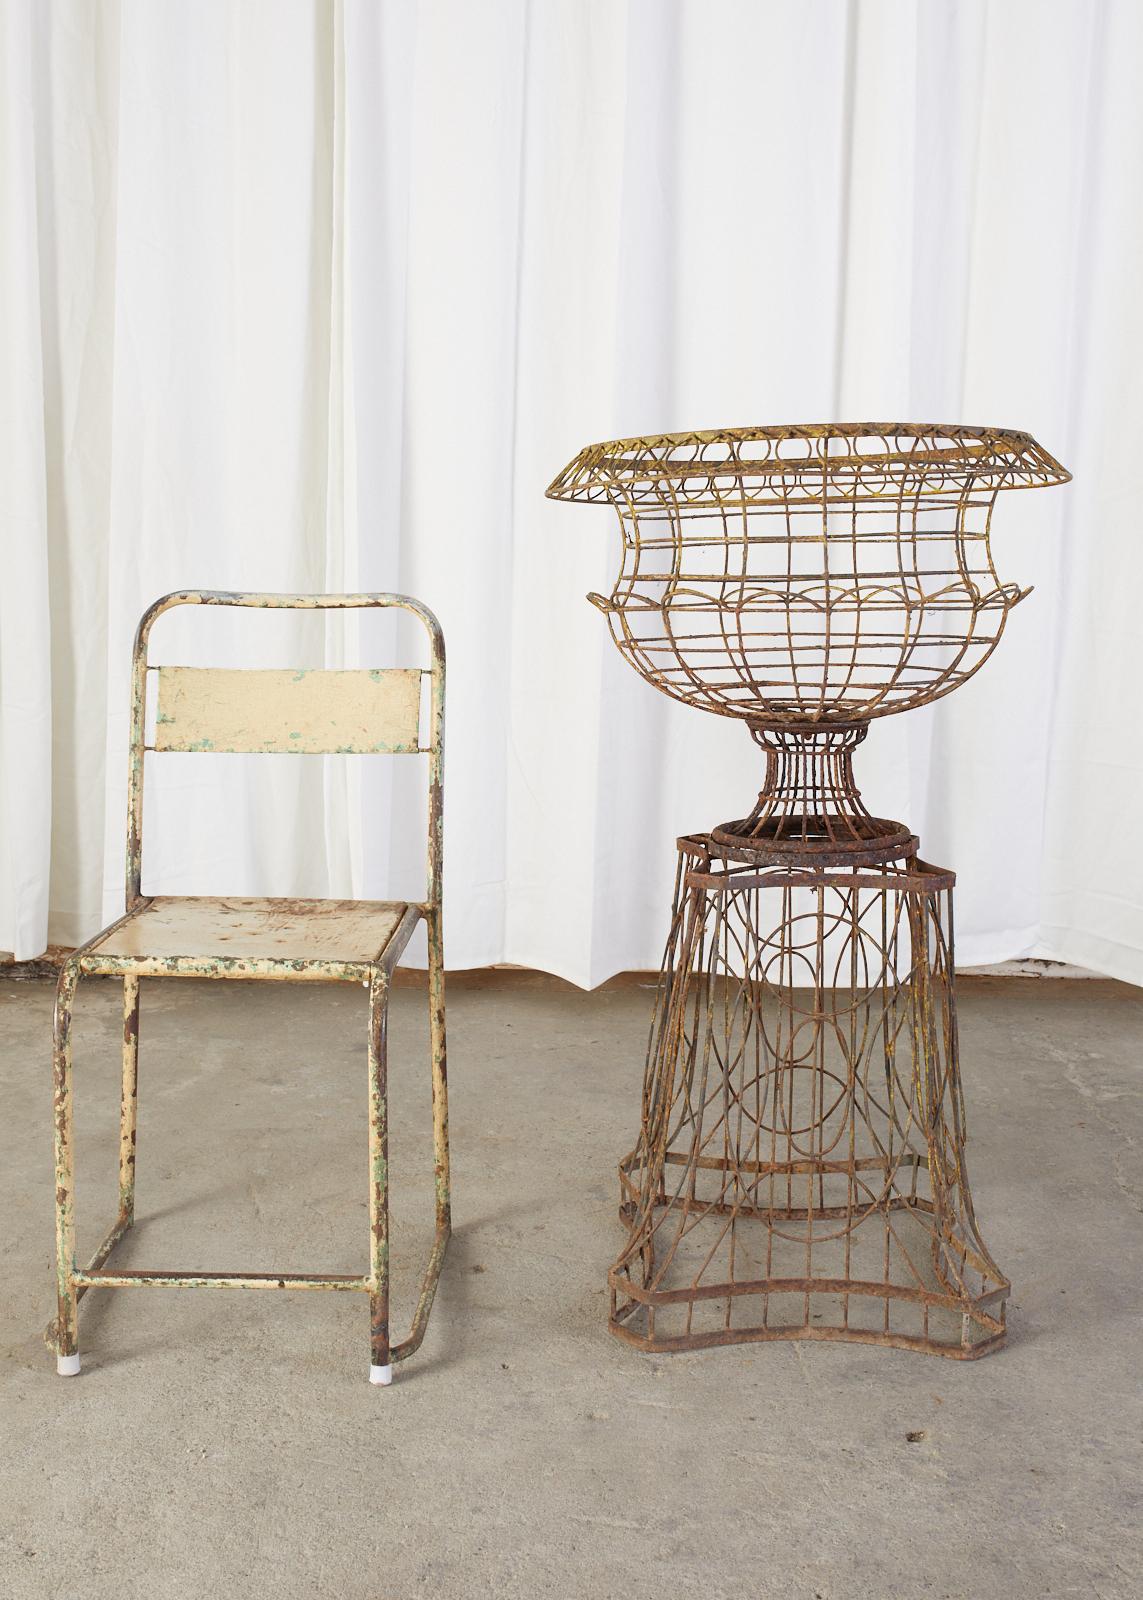 Fantastic pair of French Art Nouveau jardinières on pedestal stands. Crafted from thick iron wire into graceful, whimsical forms with each standing 40 inches high. Decorated with beautiful curves and shapes the stands have a naturally inspired form